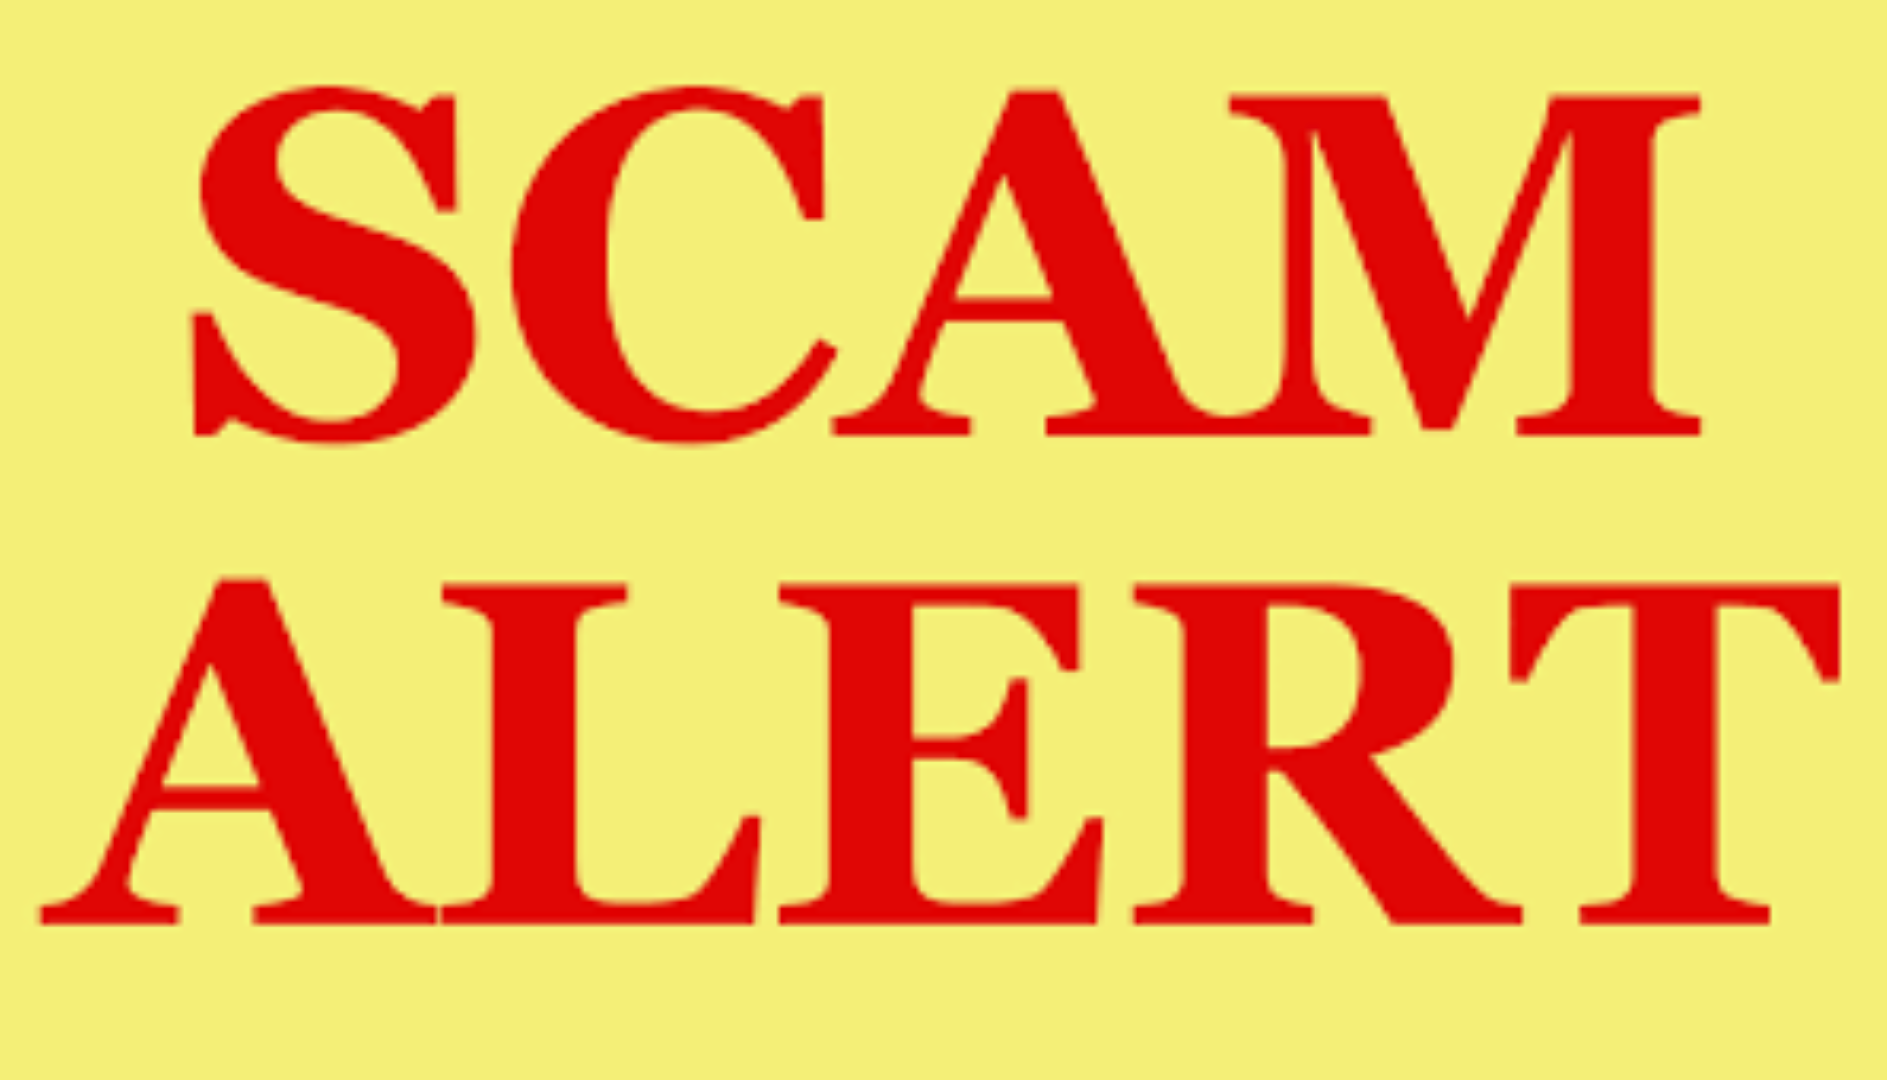 Scam Alert: Organization requesting for an exam with affiliate scam sites